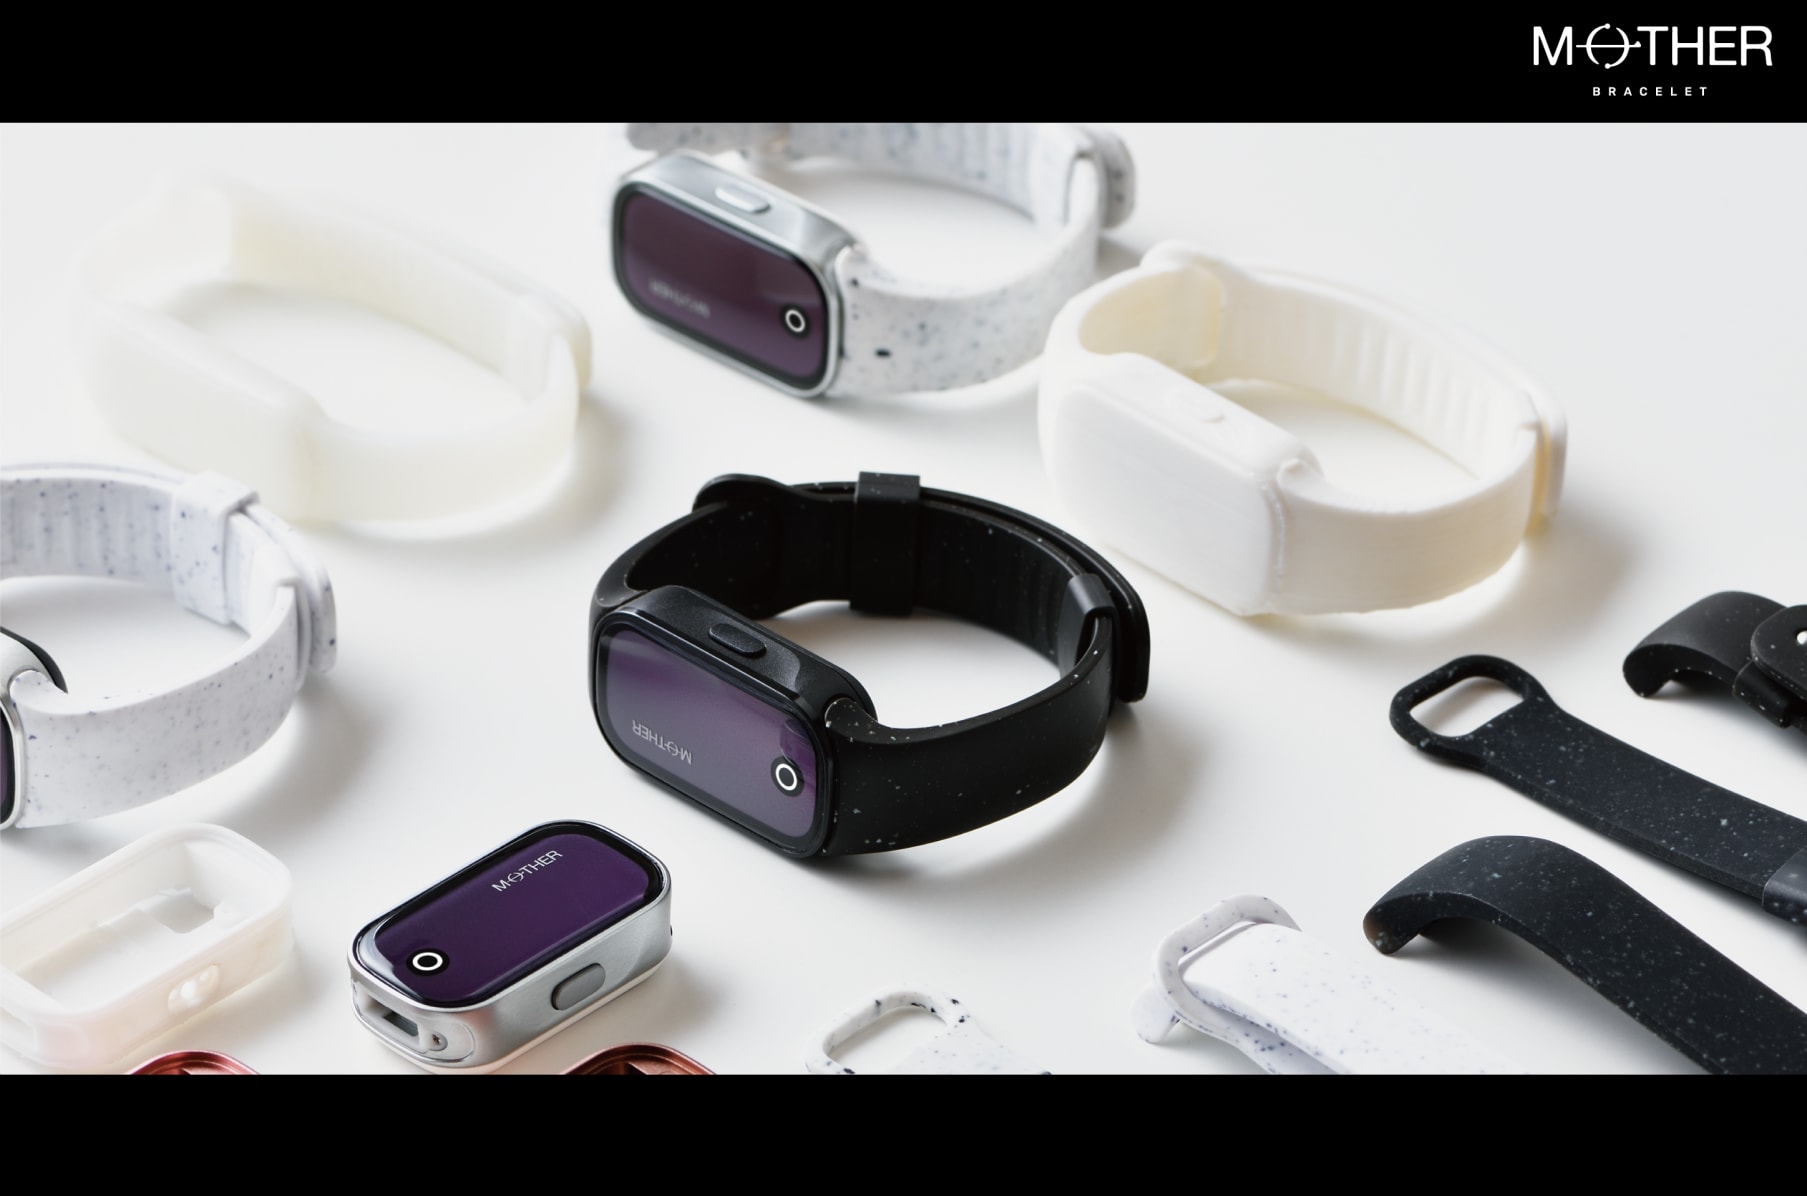 MOTHER Bracelet: First no-charging health tracker | Indiegogo